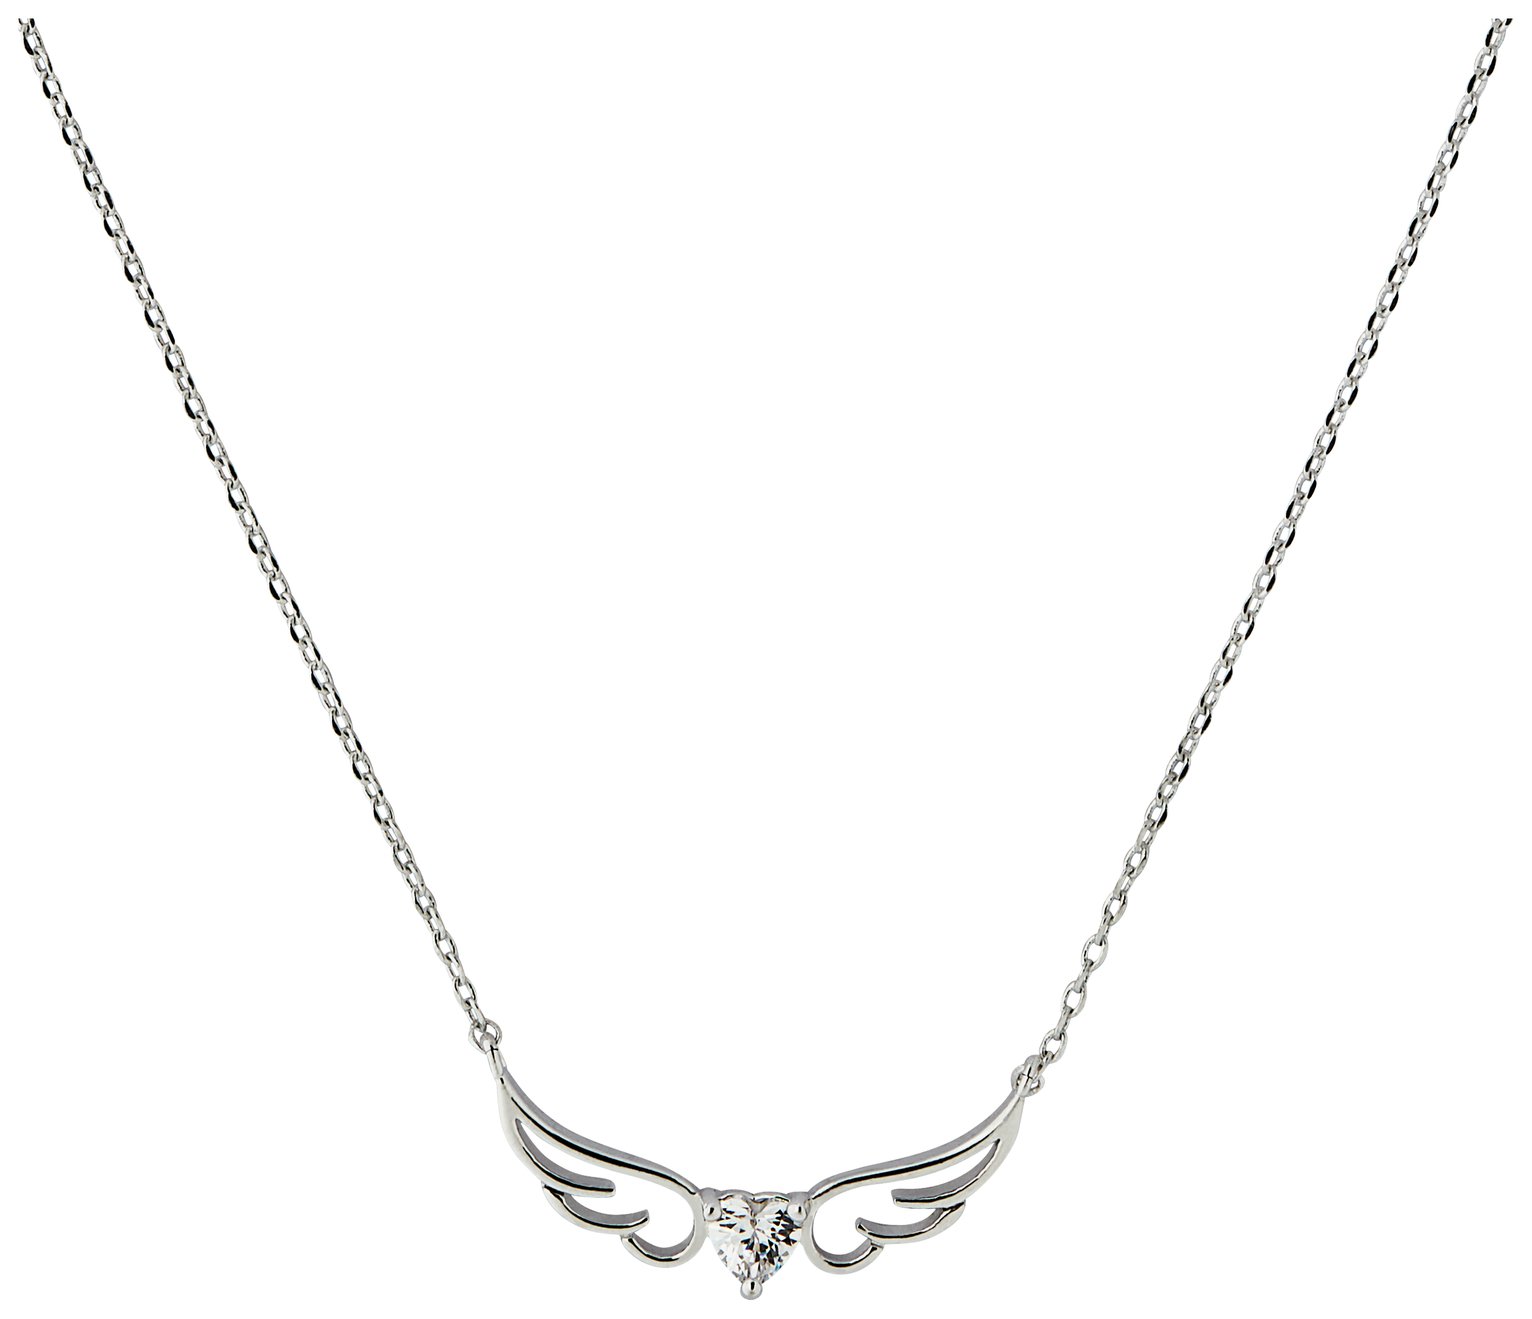 Amelia Grace Silver Coloured Angel Wing Pendant Necklace